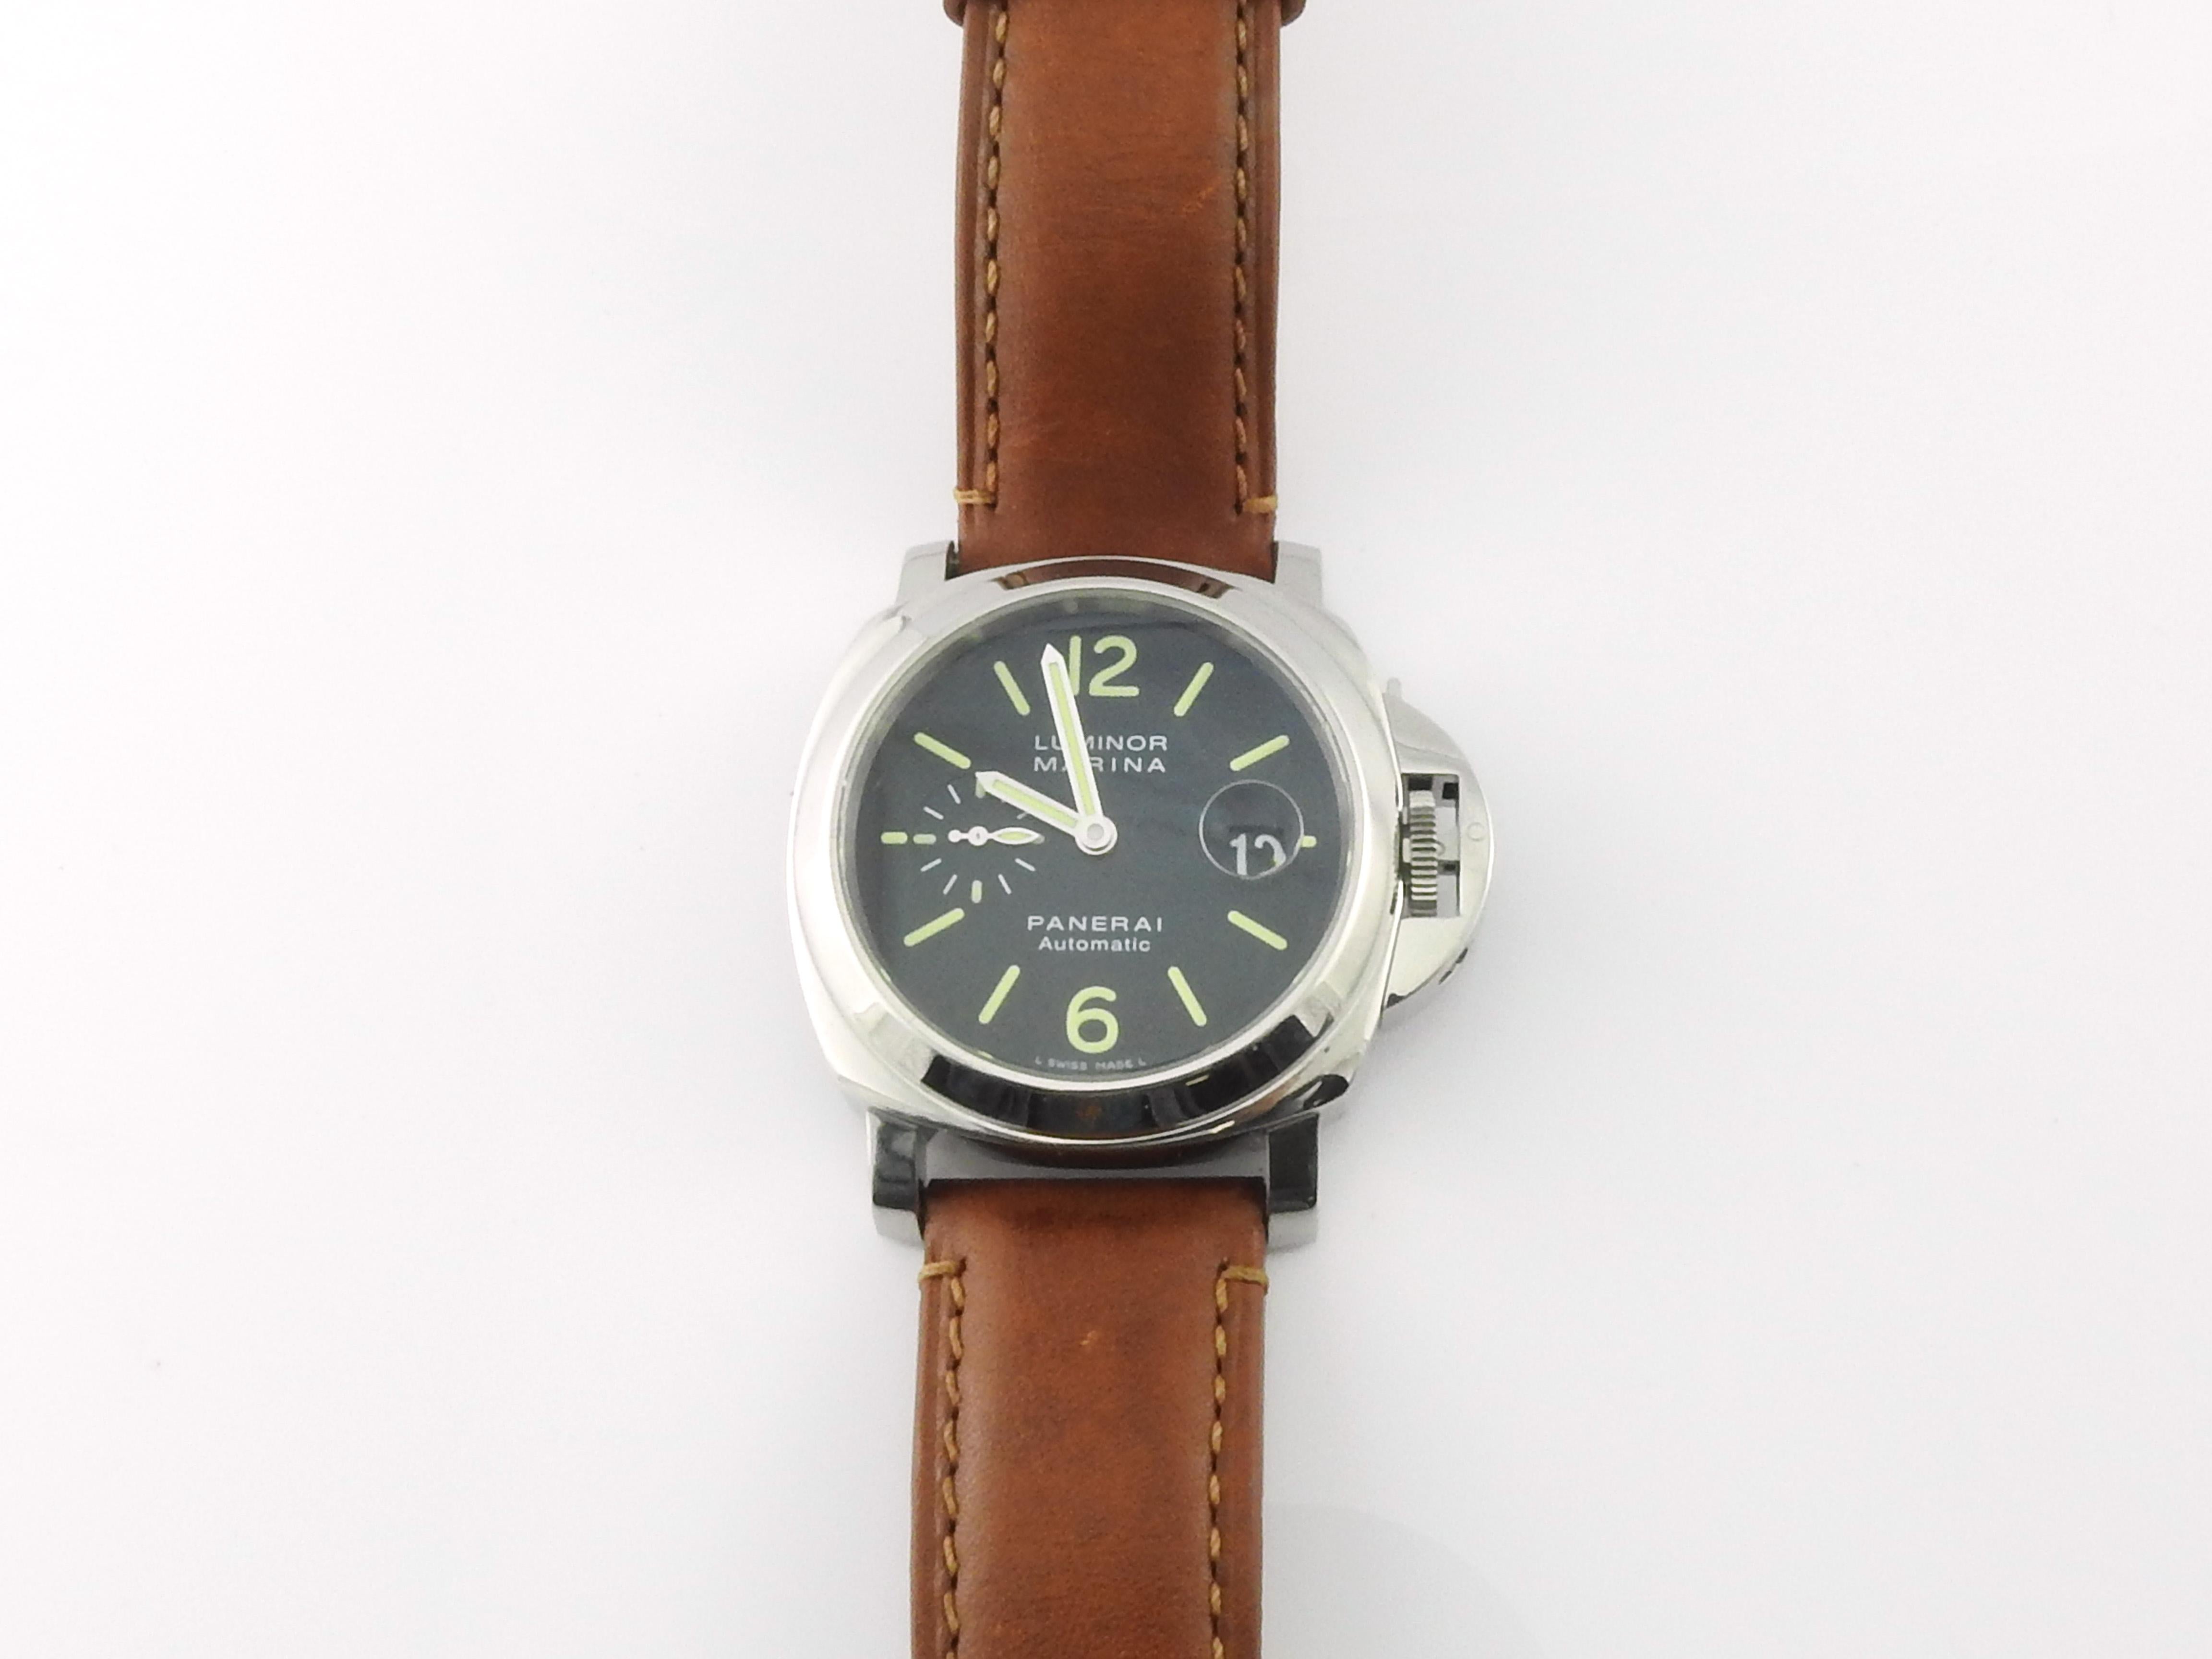 Panerai Luminor Marina Men's Watch PAM 104

Model: OP 6693
Serial: BB 1280455
K2049/6500

Stainless steel case is 44mm

Black Dial luminescent markers

Panerai Leather band with stainless steel deployment clasp

Automatic Movement

Very good